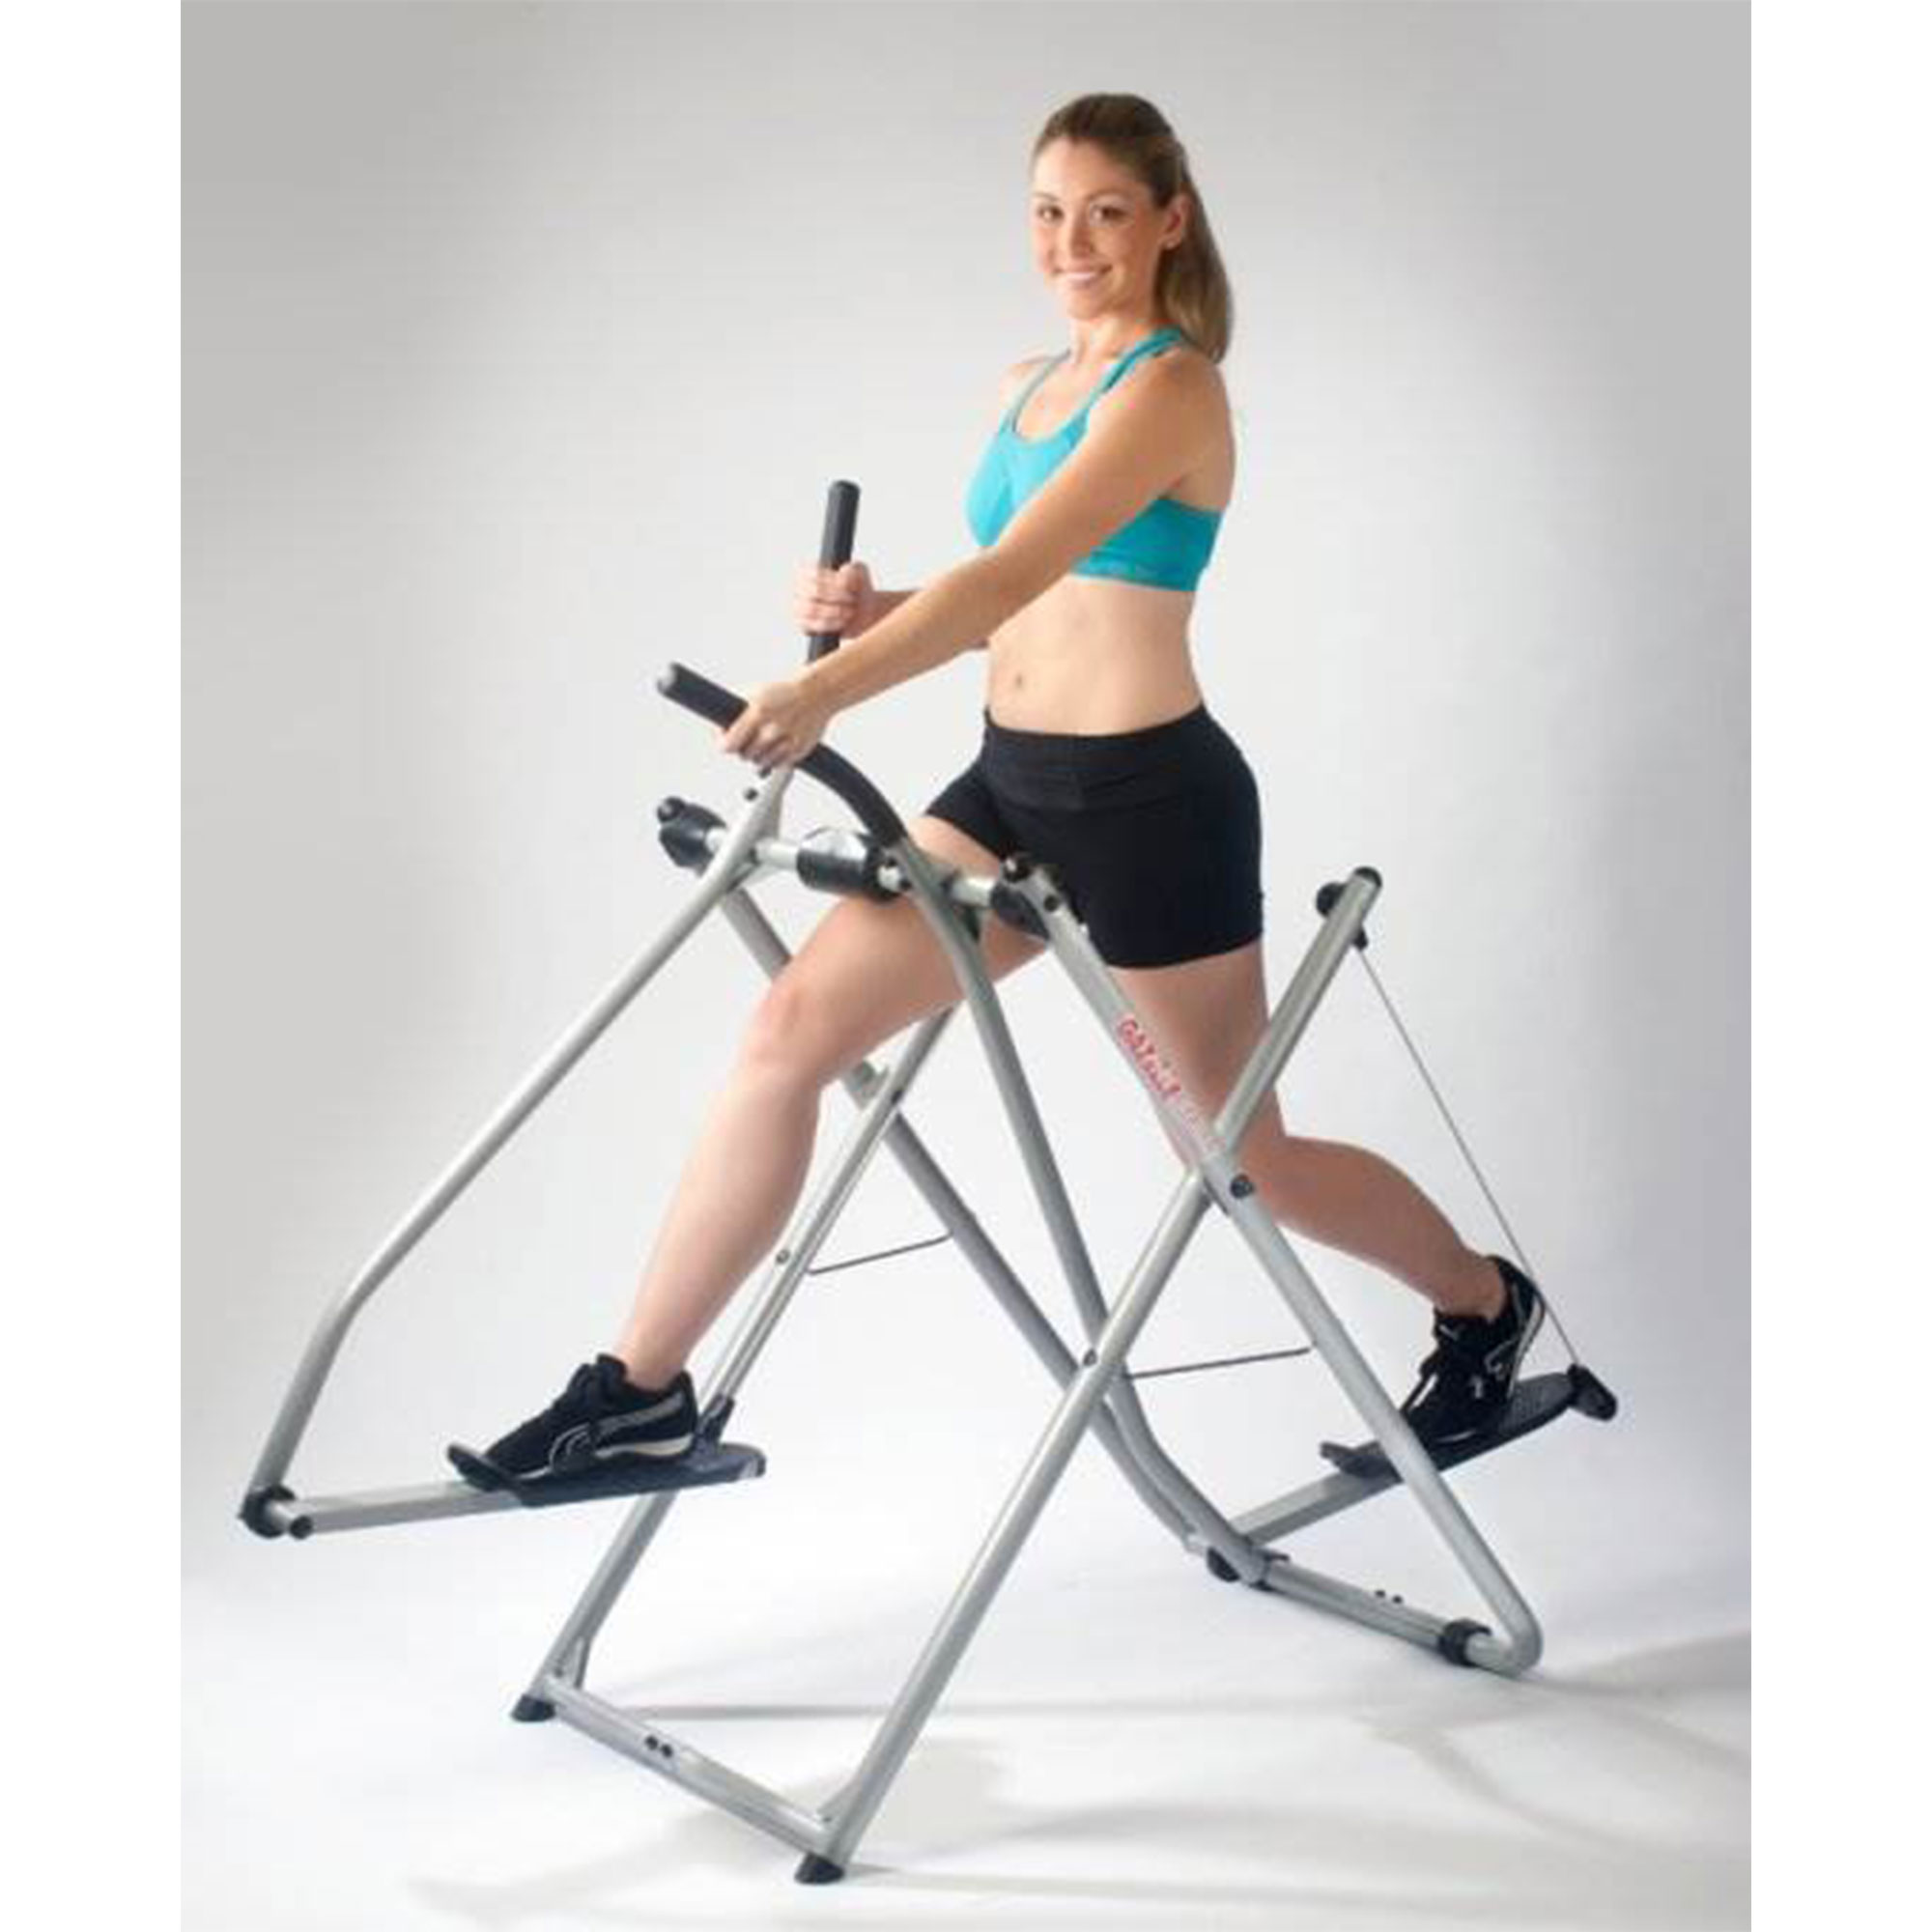 Gazelle Edge Glider Home Fitness Exercise Equipment Machine w/ Workout DVD - image 3 of 12